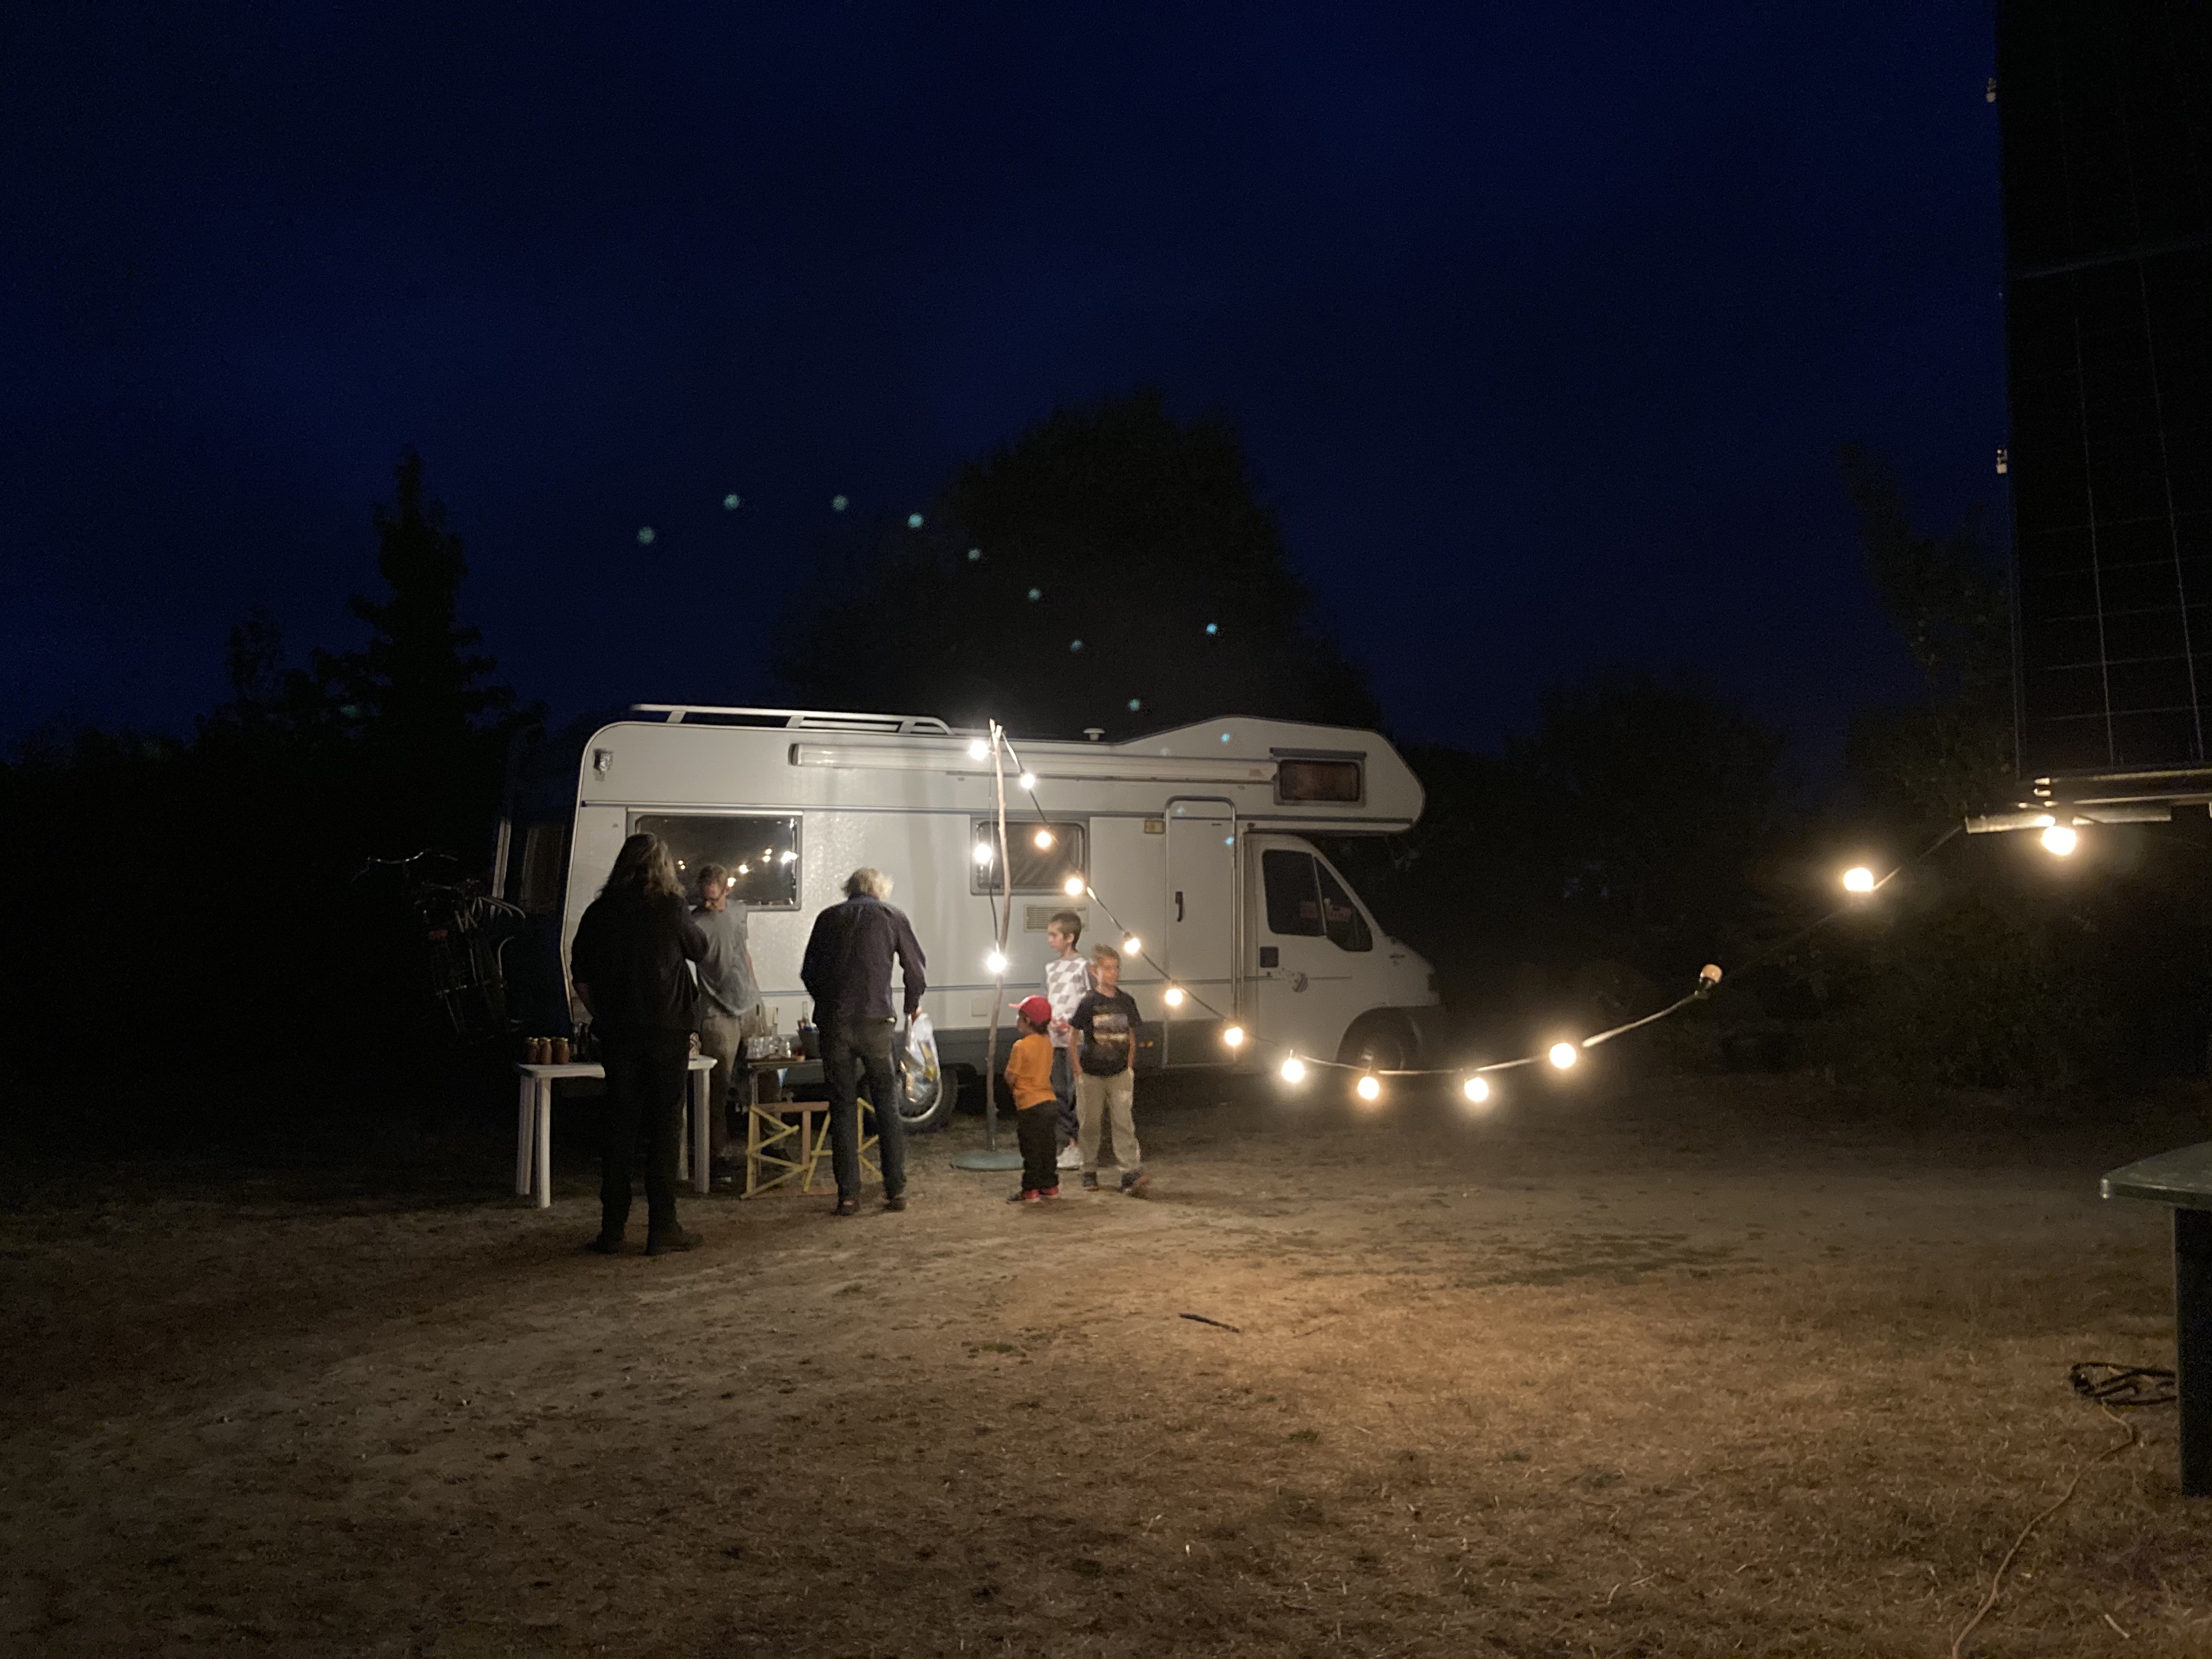 A string of lights connected to a campervan at night, where we had the outdoor cinema night